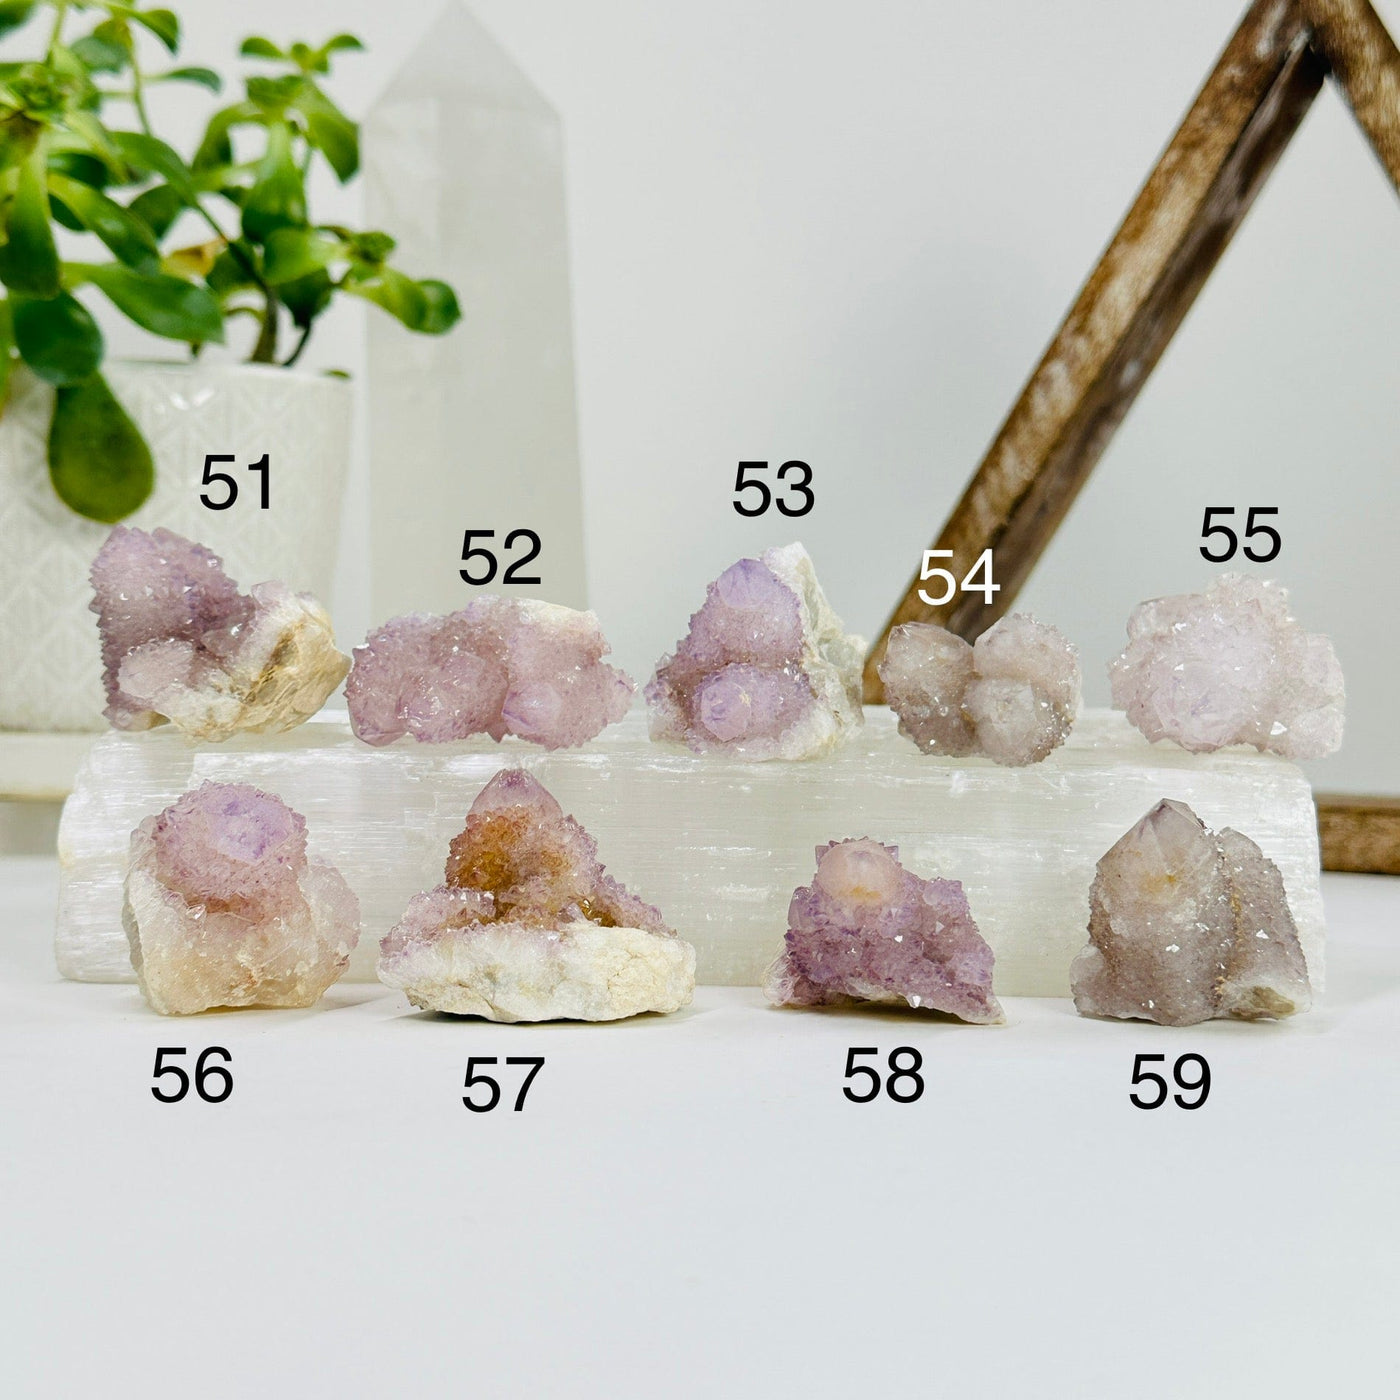 variants 51-59 of spirit quartz with decorations in the background